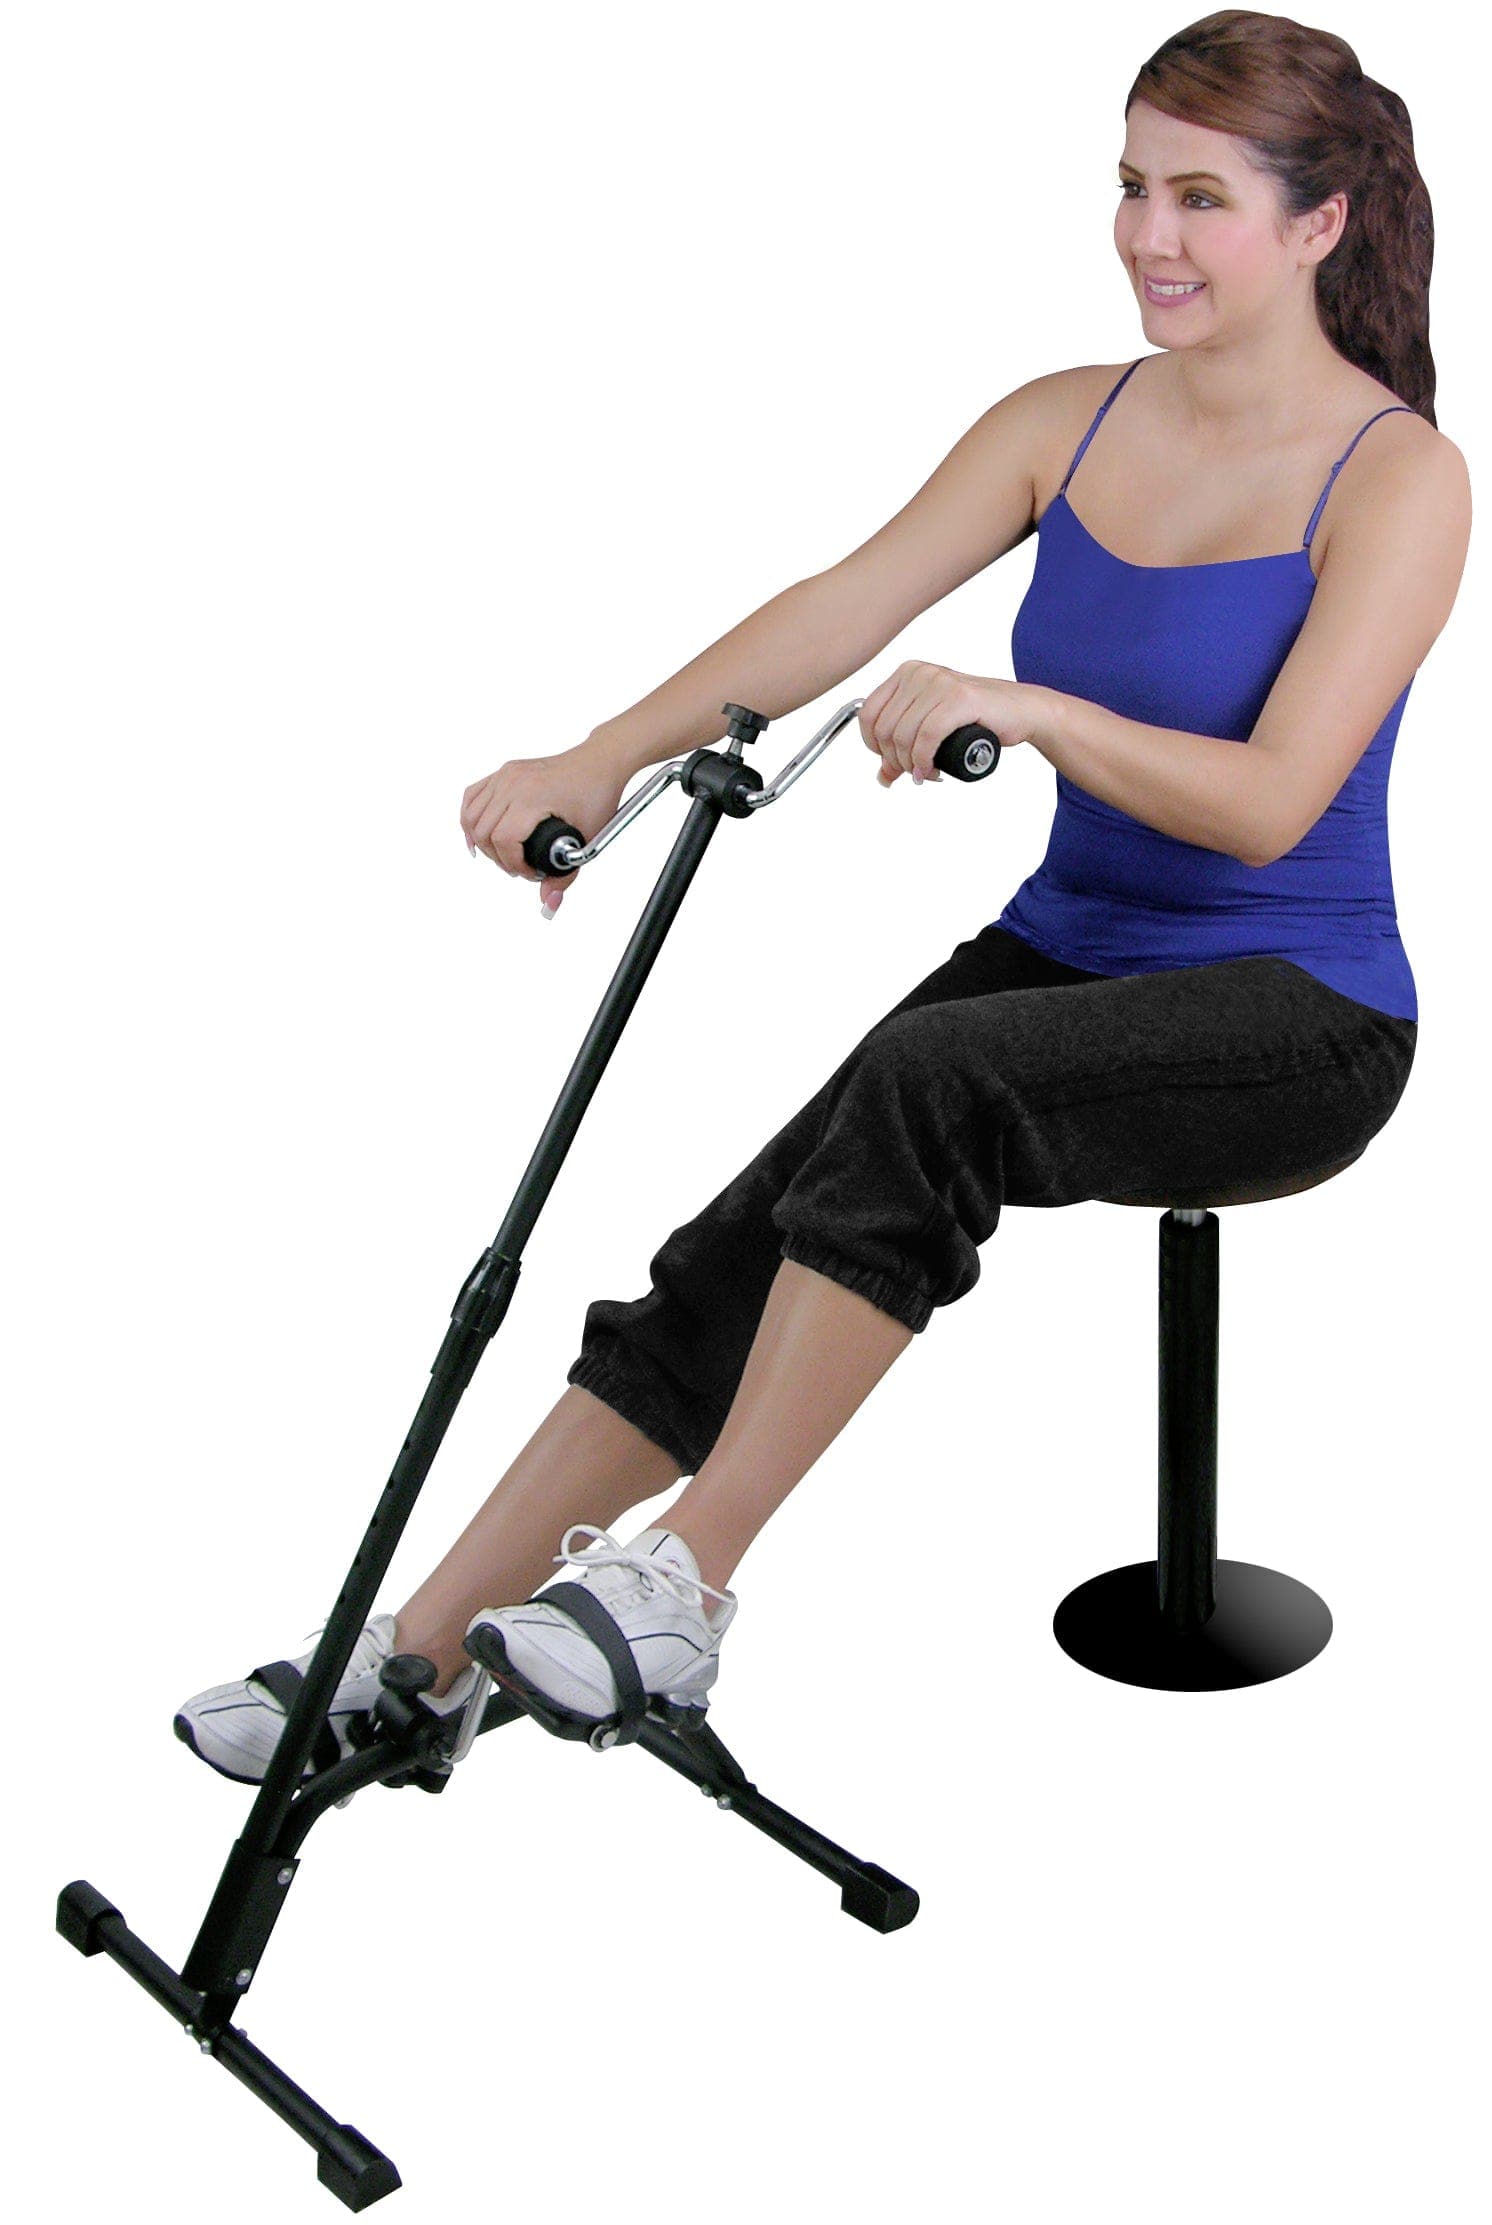 Complete Medical Exercise & Physical Therapy North American Resistive Pedal Exerciser w/Hand Pedal